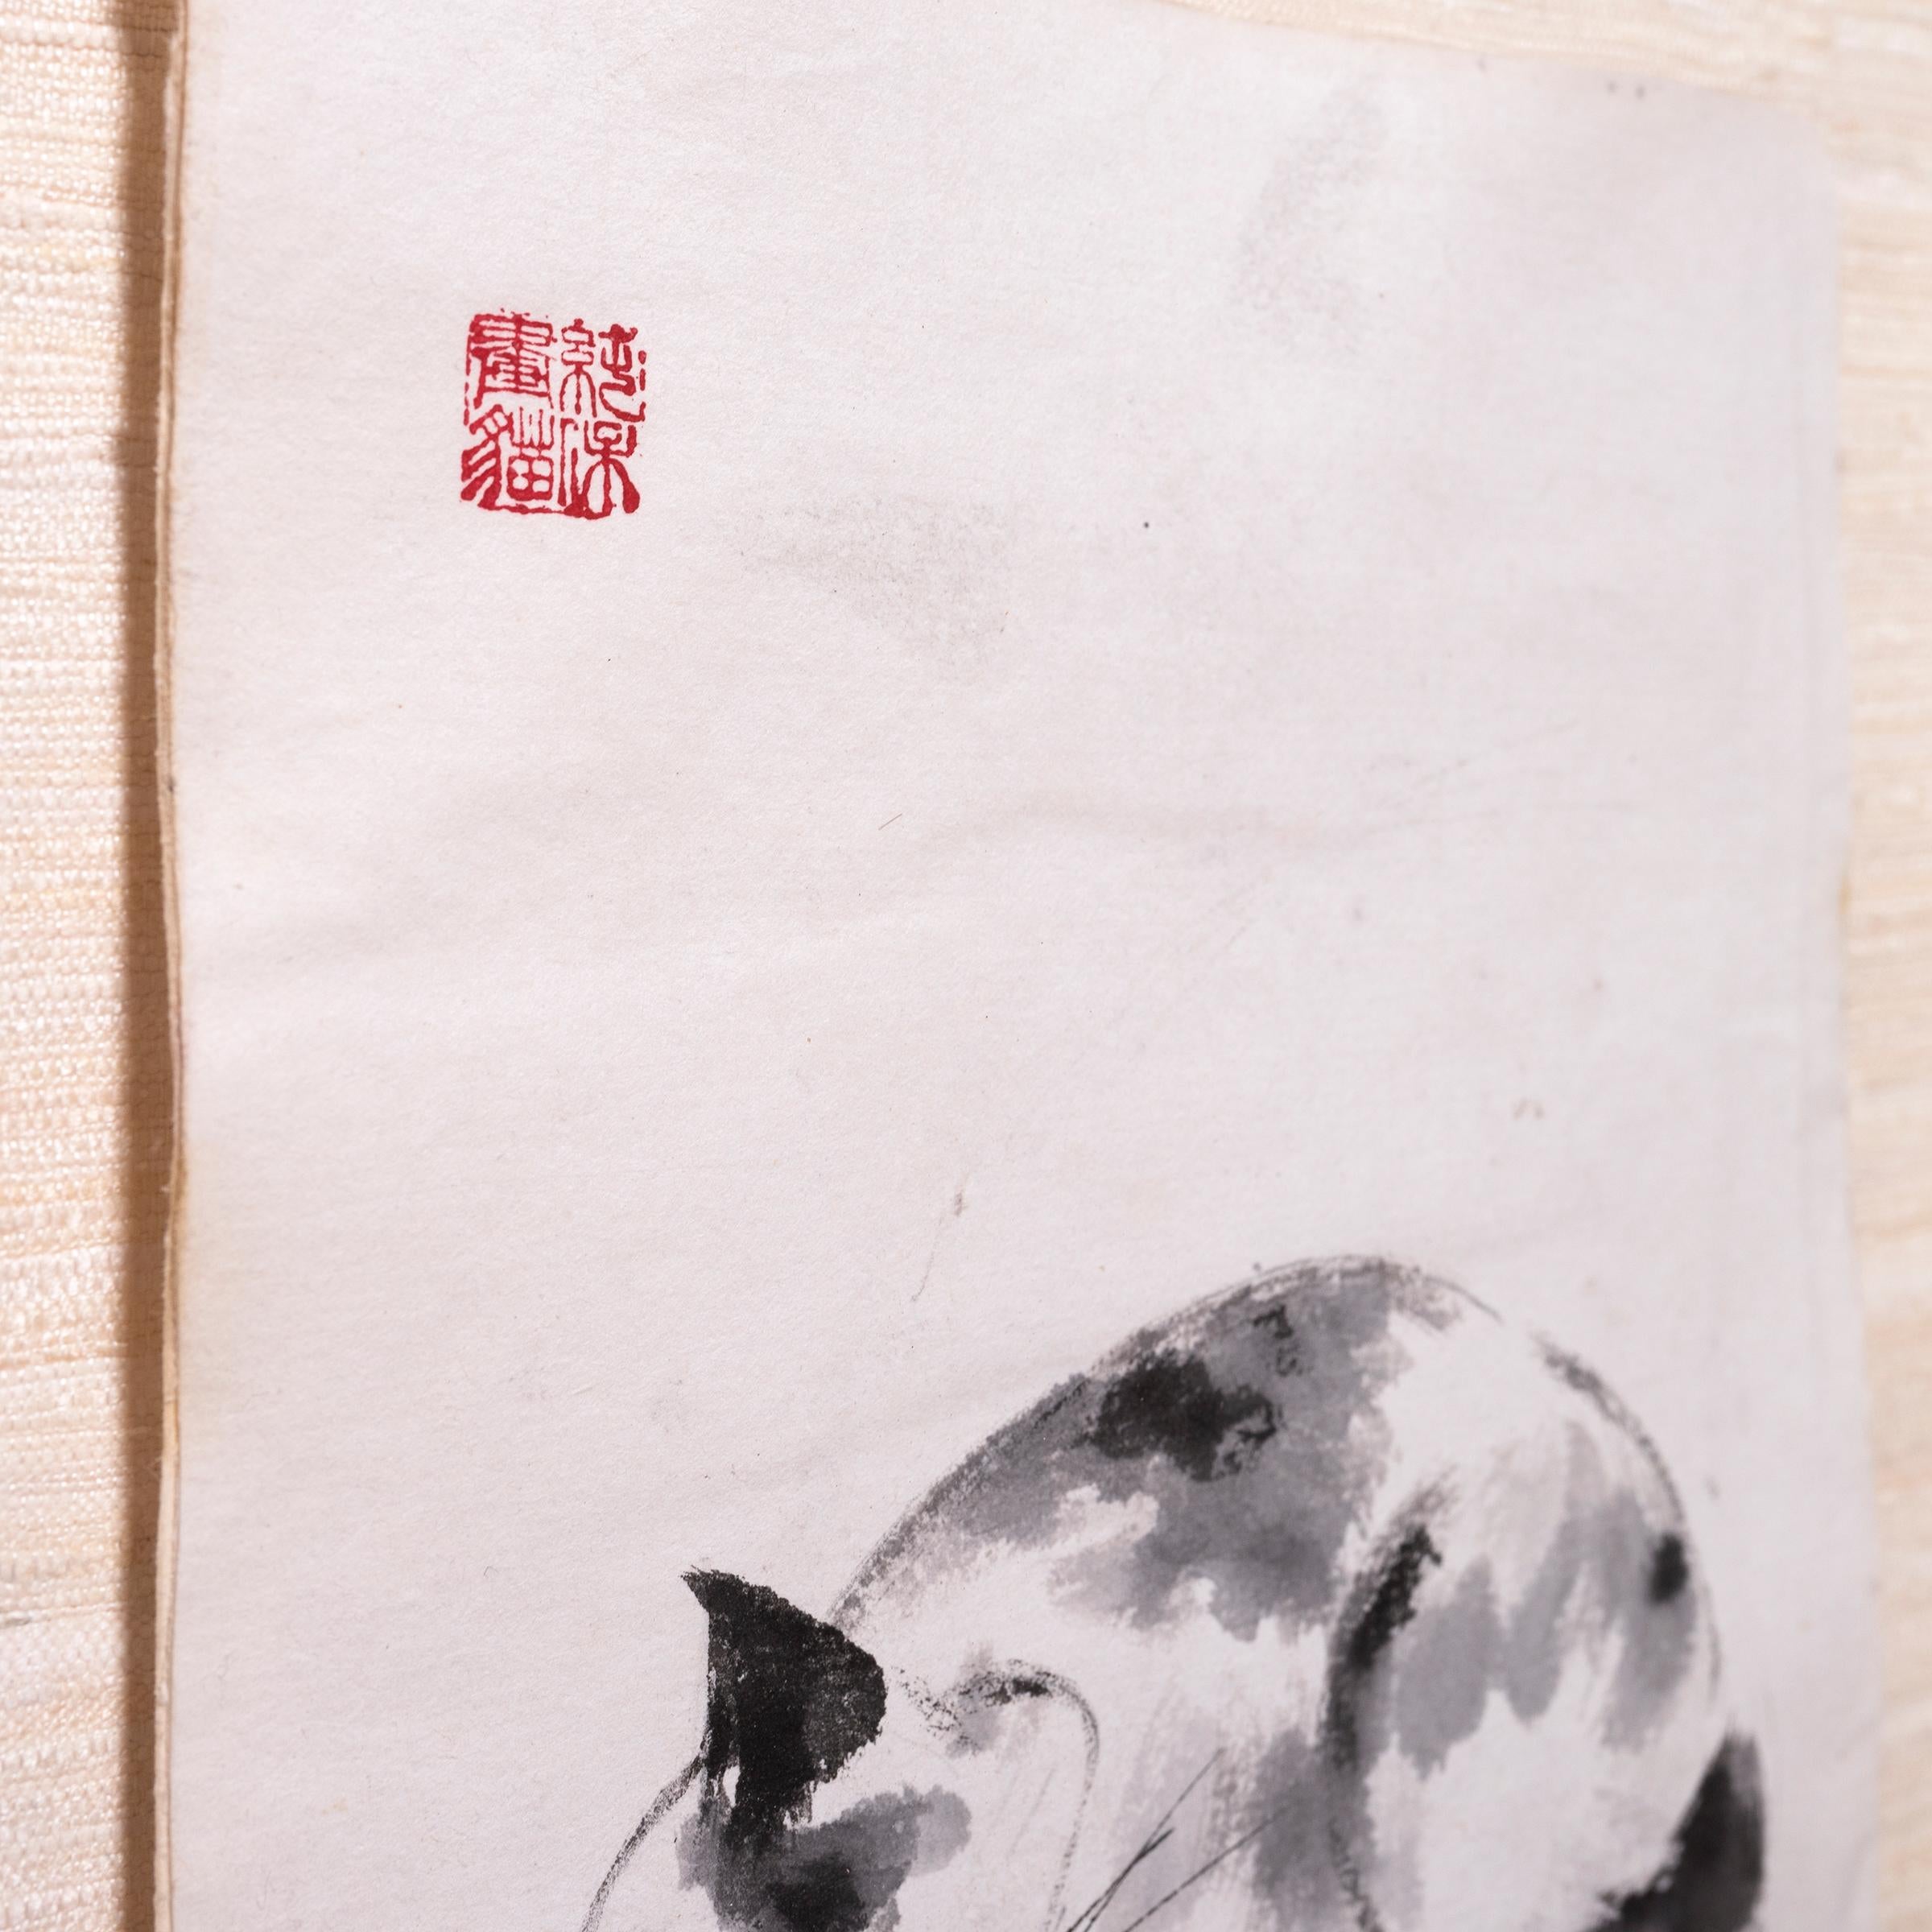 This charming ink painting is a contemporary example of the traditional art of calligraphy painting. With a careful hand, the artist uses just a few brush strokes to capture the innocent nature of a kitten, peacefully sleeping with his head on his